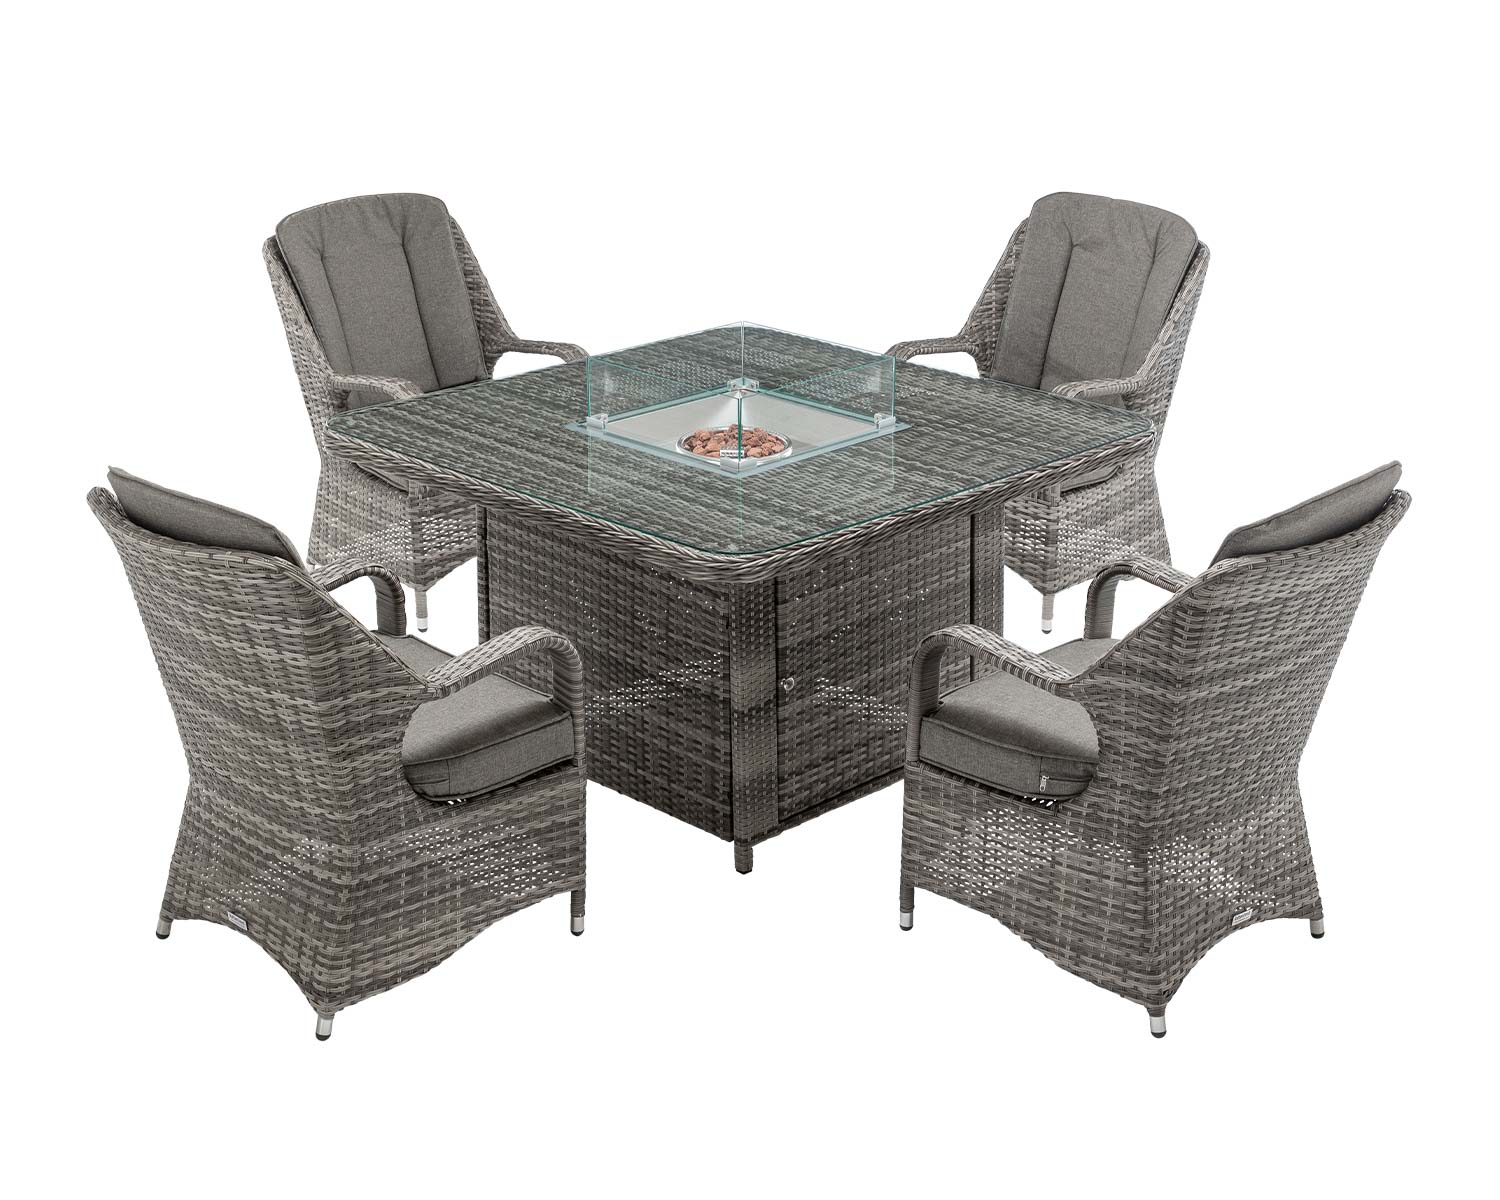 4 Seat Rattan Garden Dining Set With Square Table In Grey With Fire Pit Marseille Rattan Direct